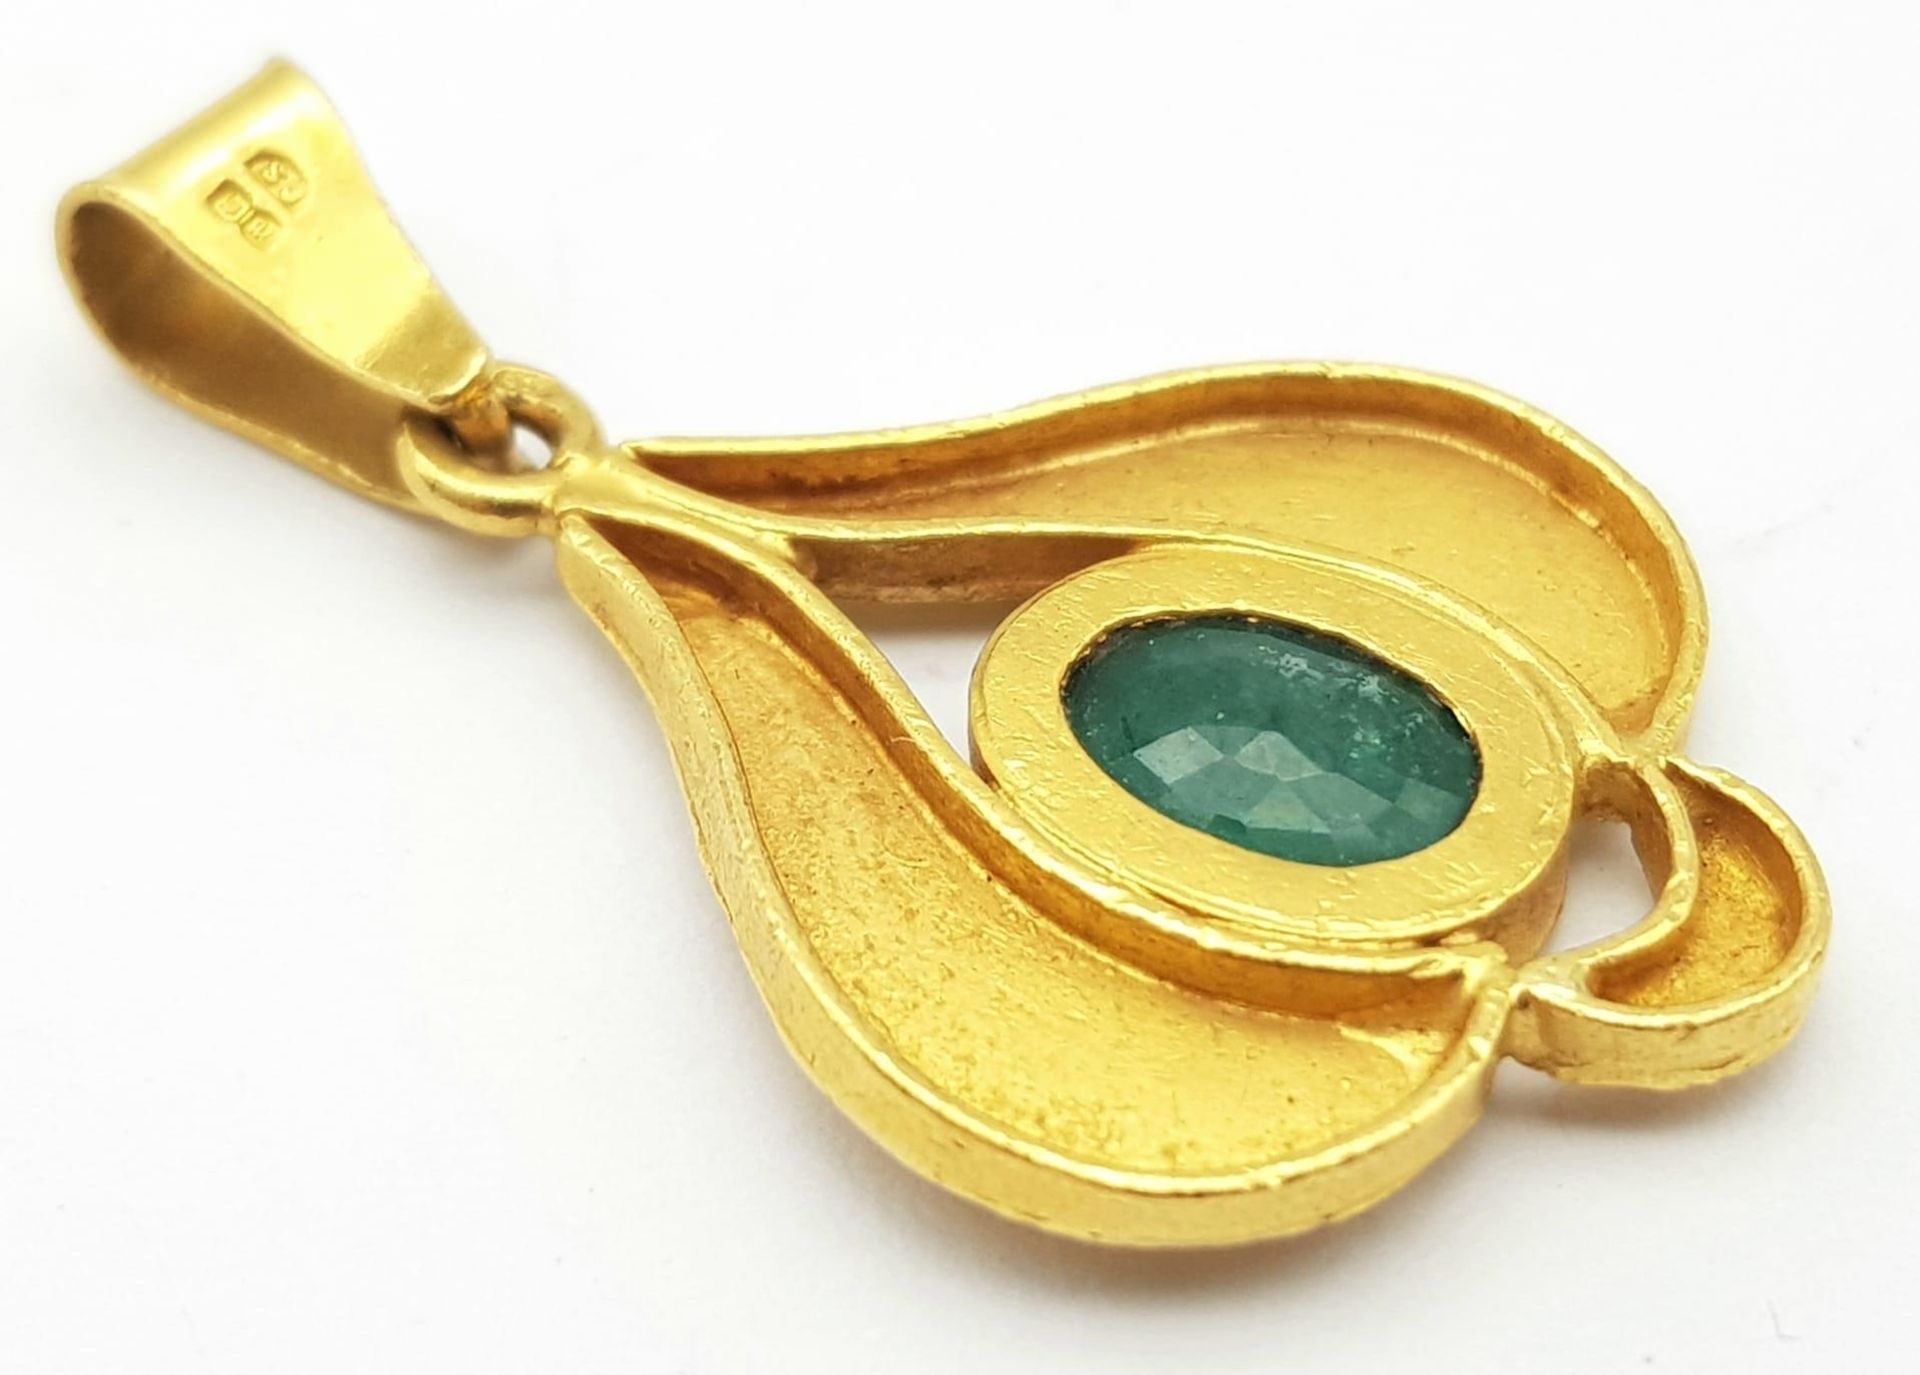 A 22K Yellow Gold and Emerald Pendant. Decorative leaf pattern with a central oval emerald. 4cm. 4. - Image 2 of 4